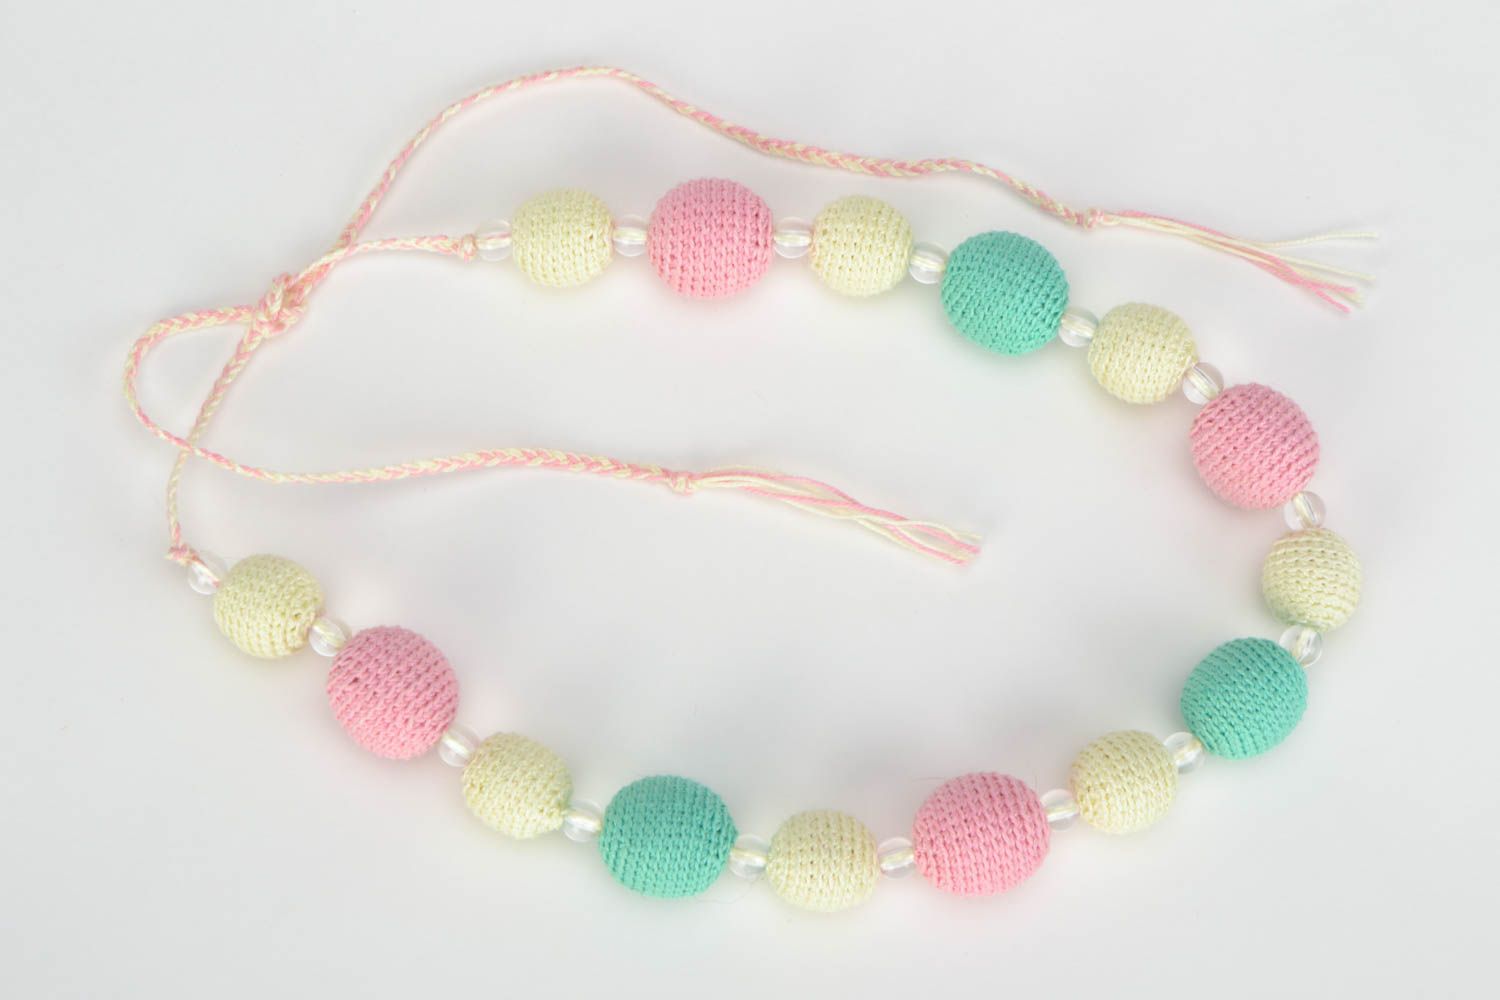 Gentle unusual handmade colorful crochet ball necklace with ties photo 2